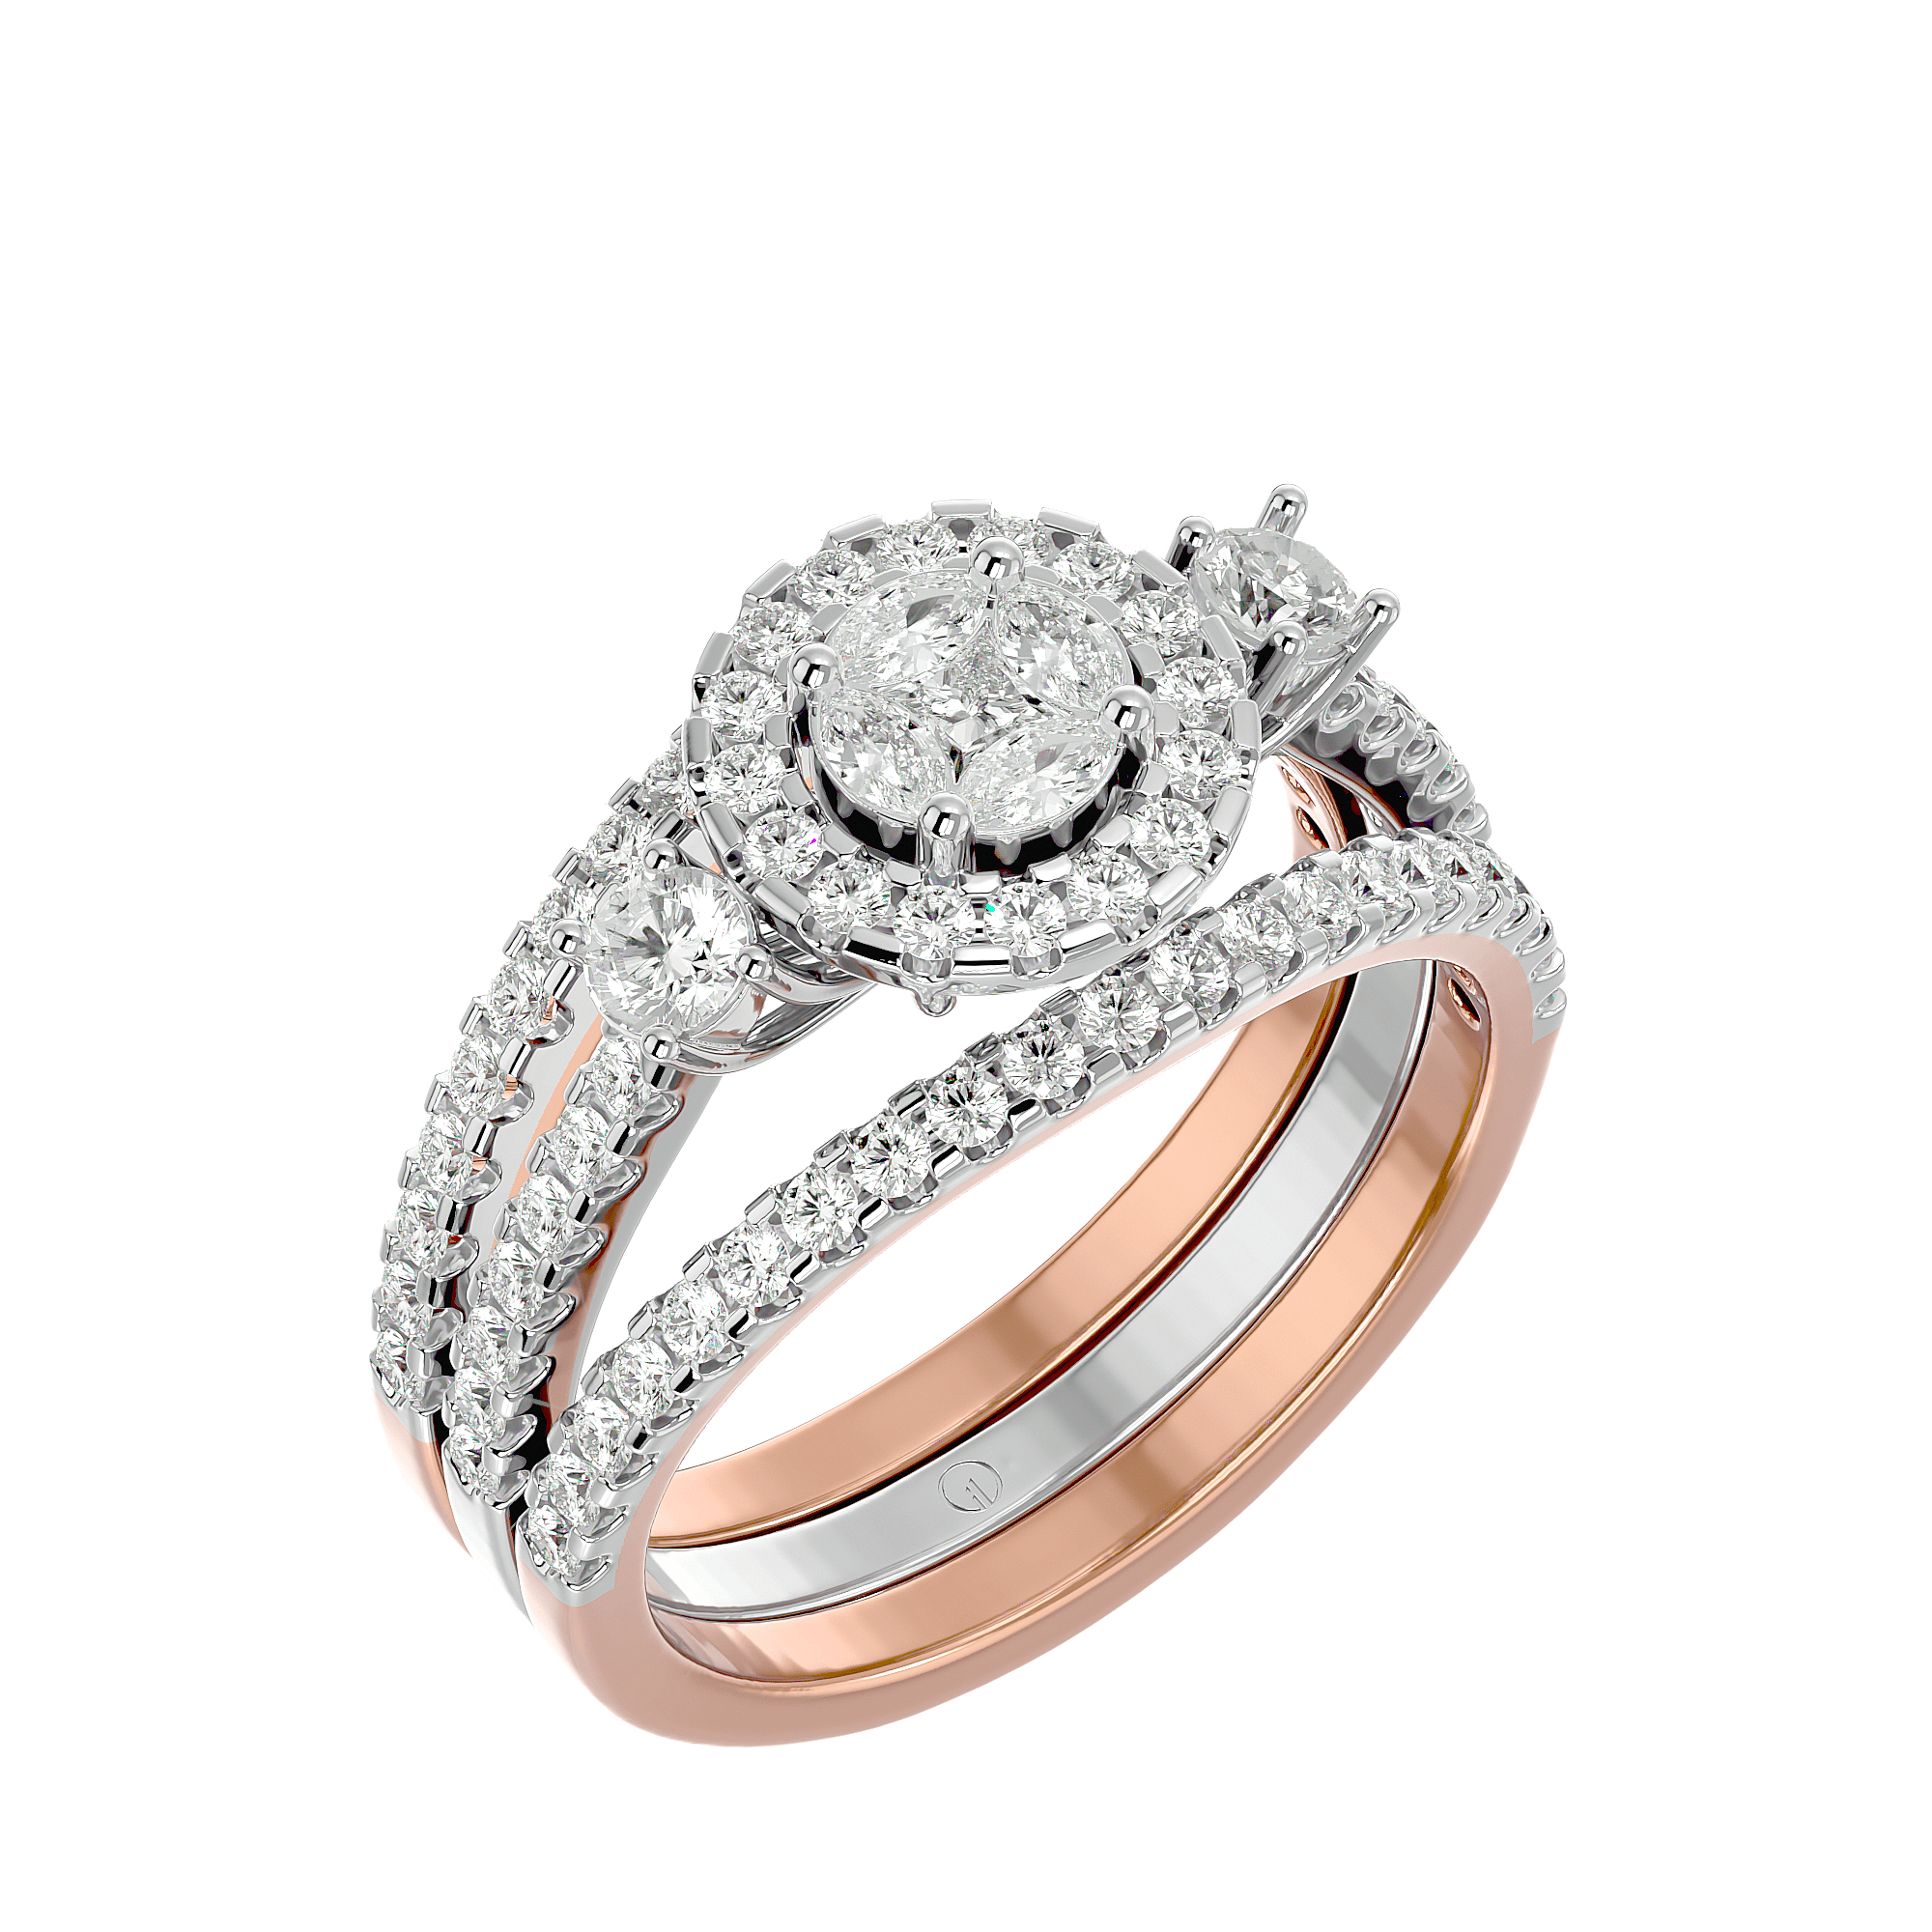 Glam-&-Glitter-Solitaire-Illusion-Diamond-Ring-RG2104A-View-01